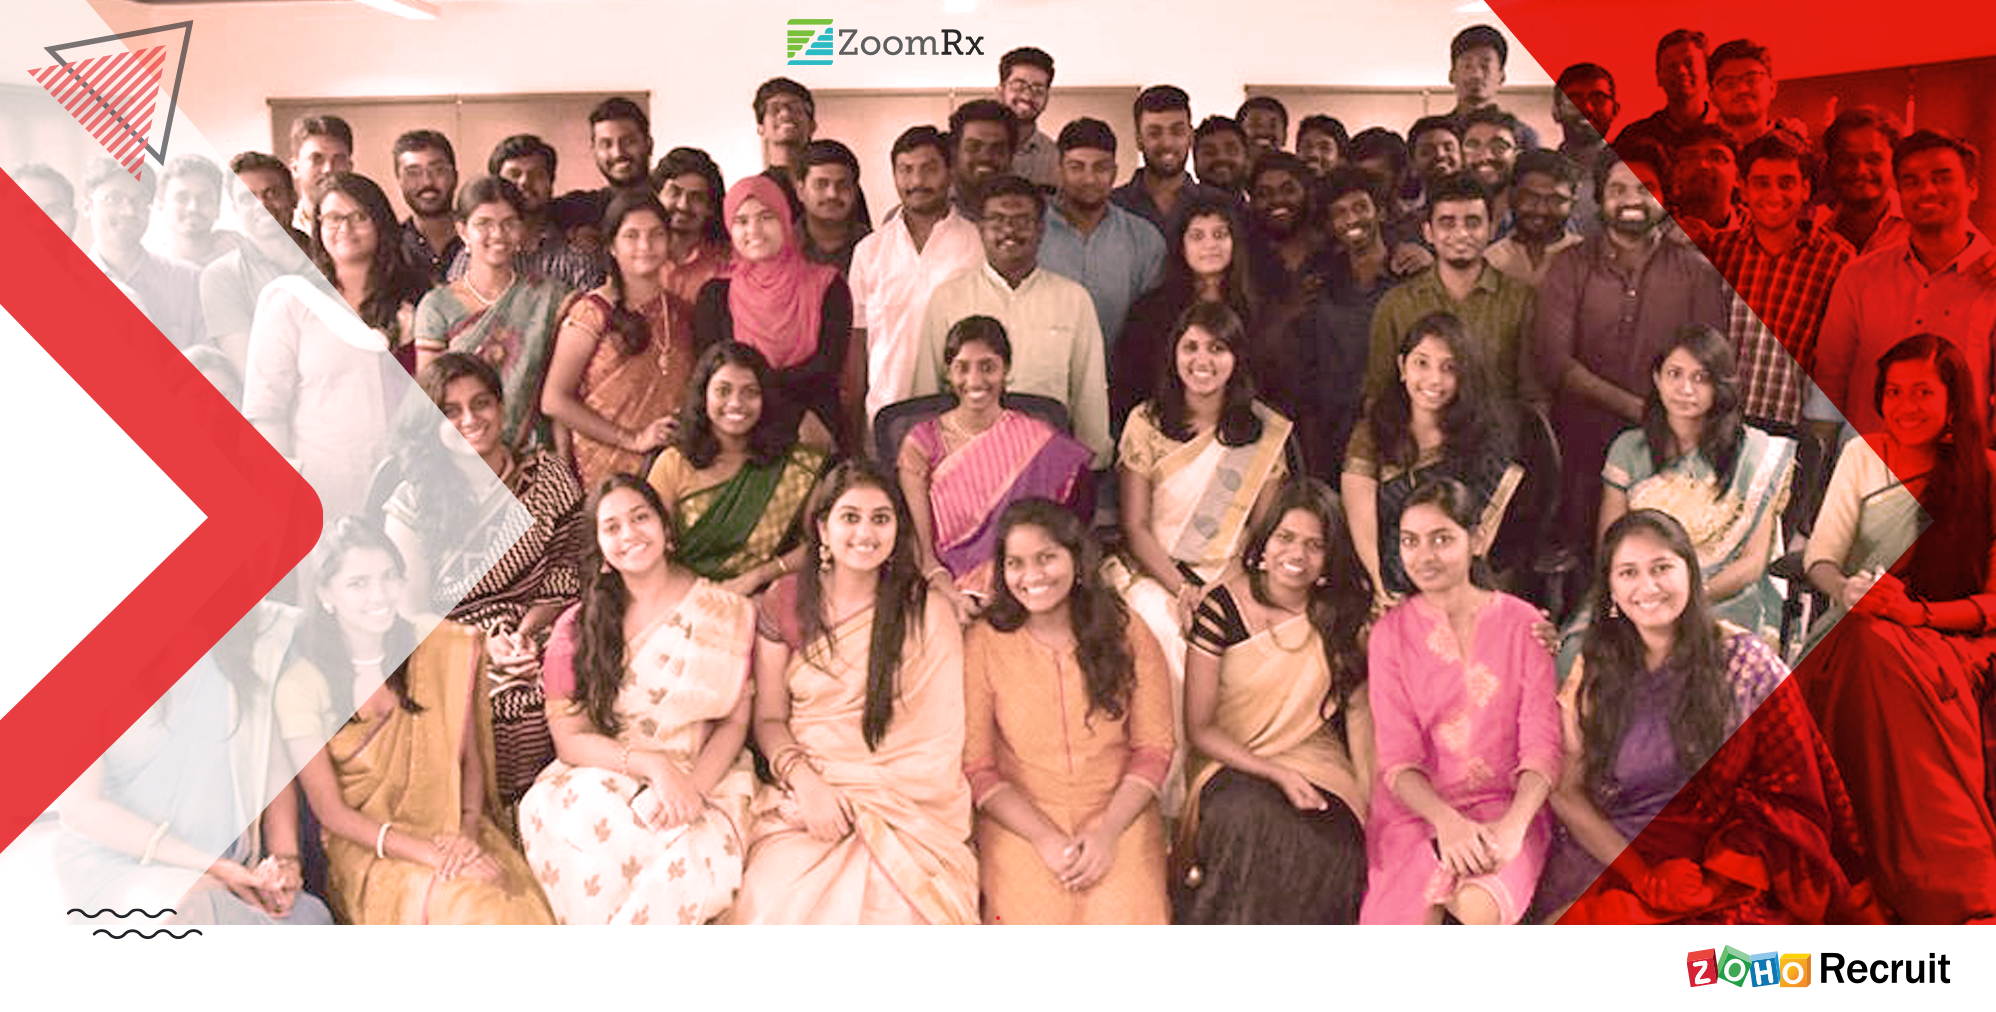 ZoomRx seeks an integrated, automated hiring platform with Zoho Recruit